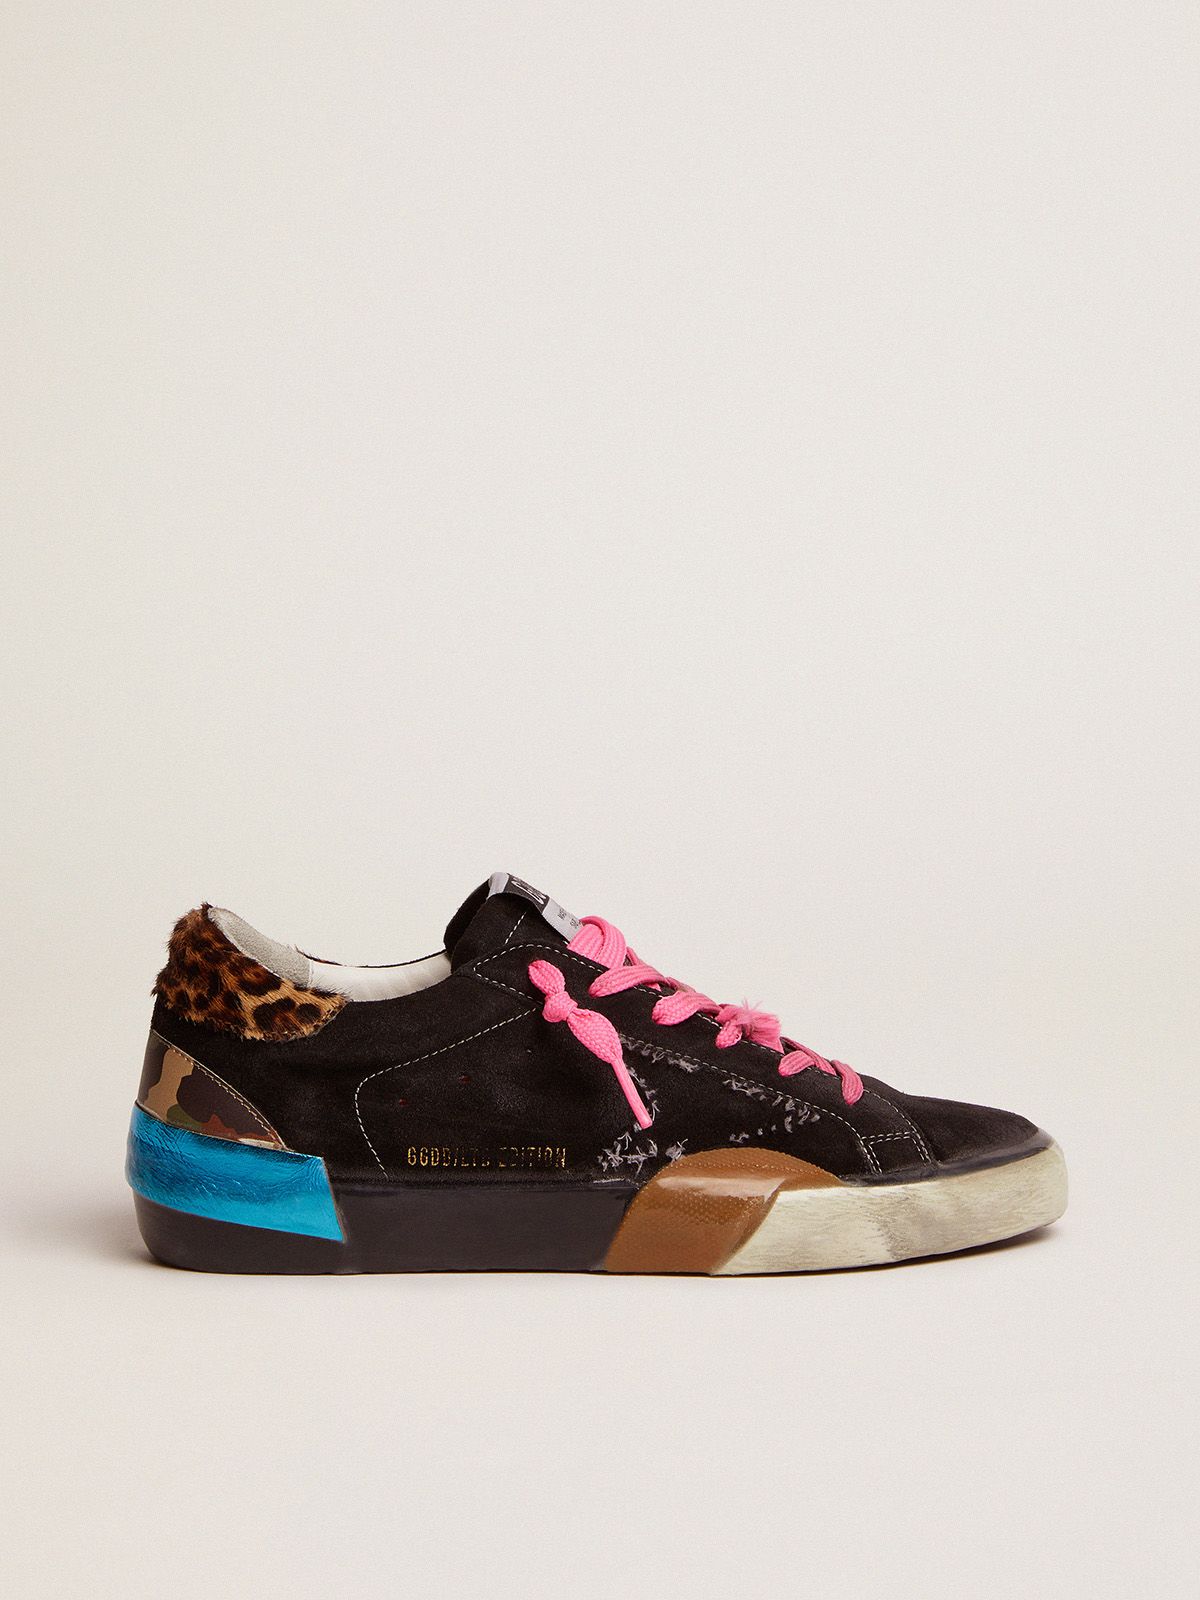 golden goose leopard-print LAB tab with and skin black suede heel sneakers Super-Star multi-foxing pony in